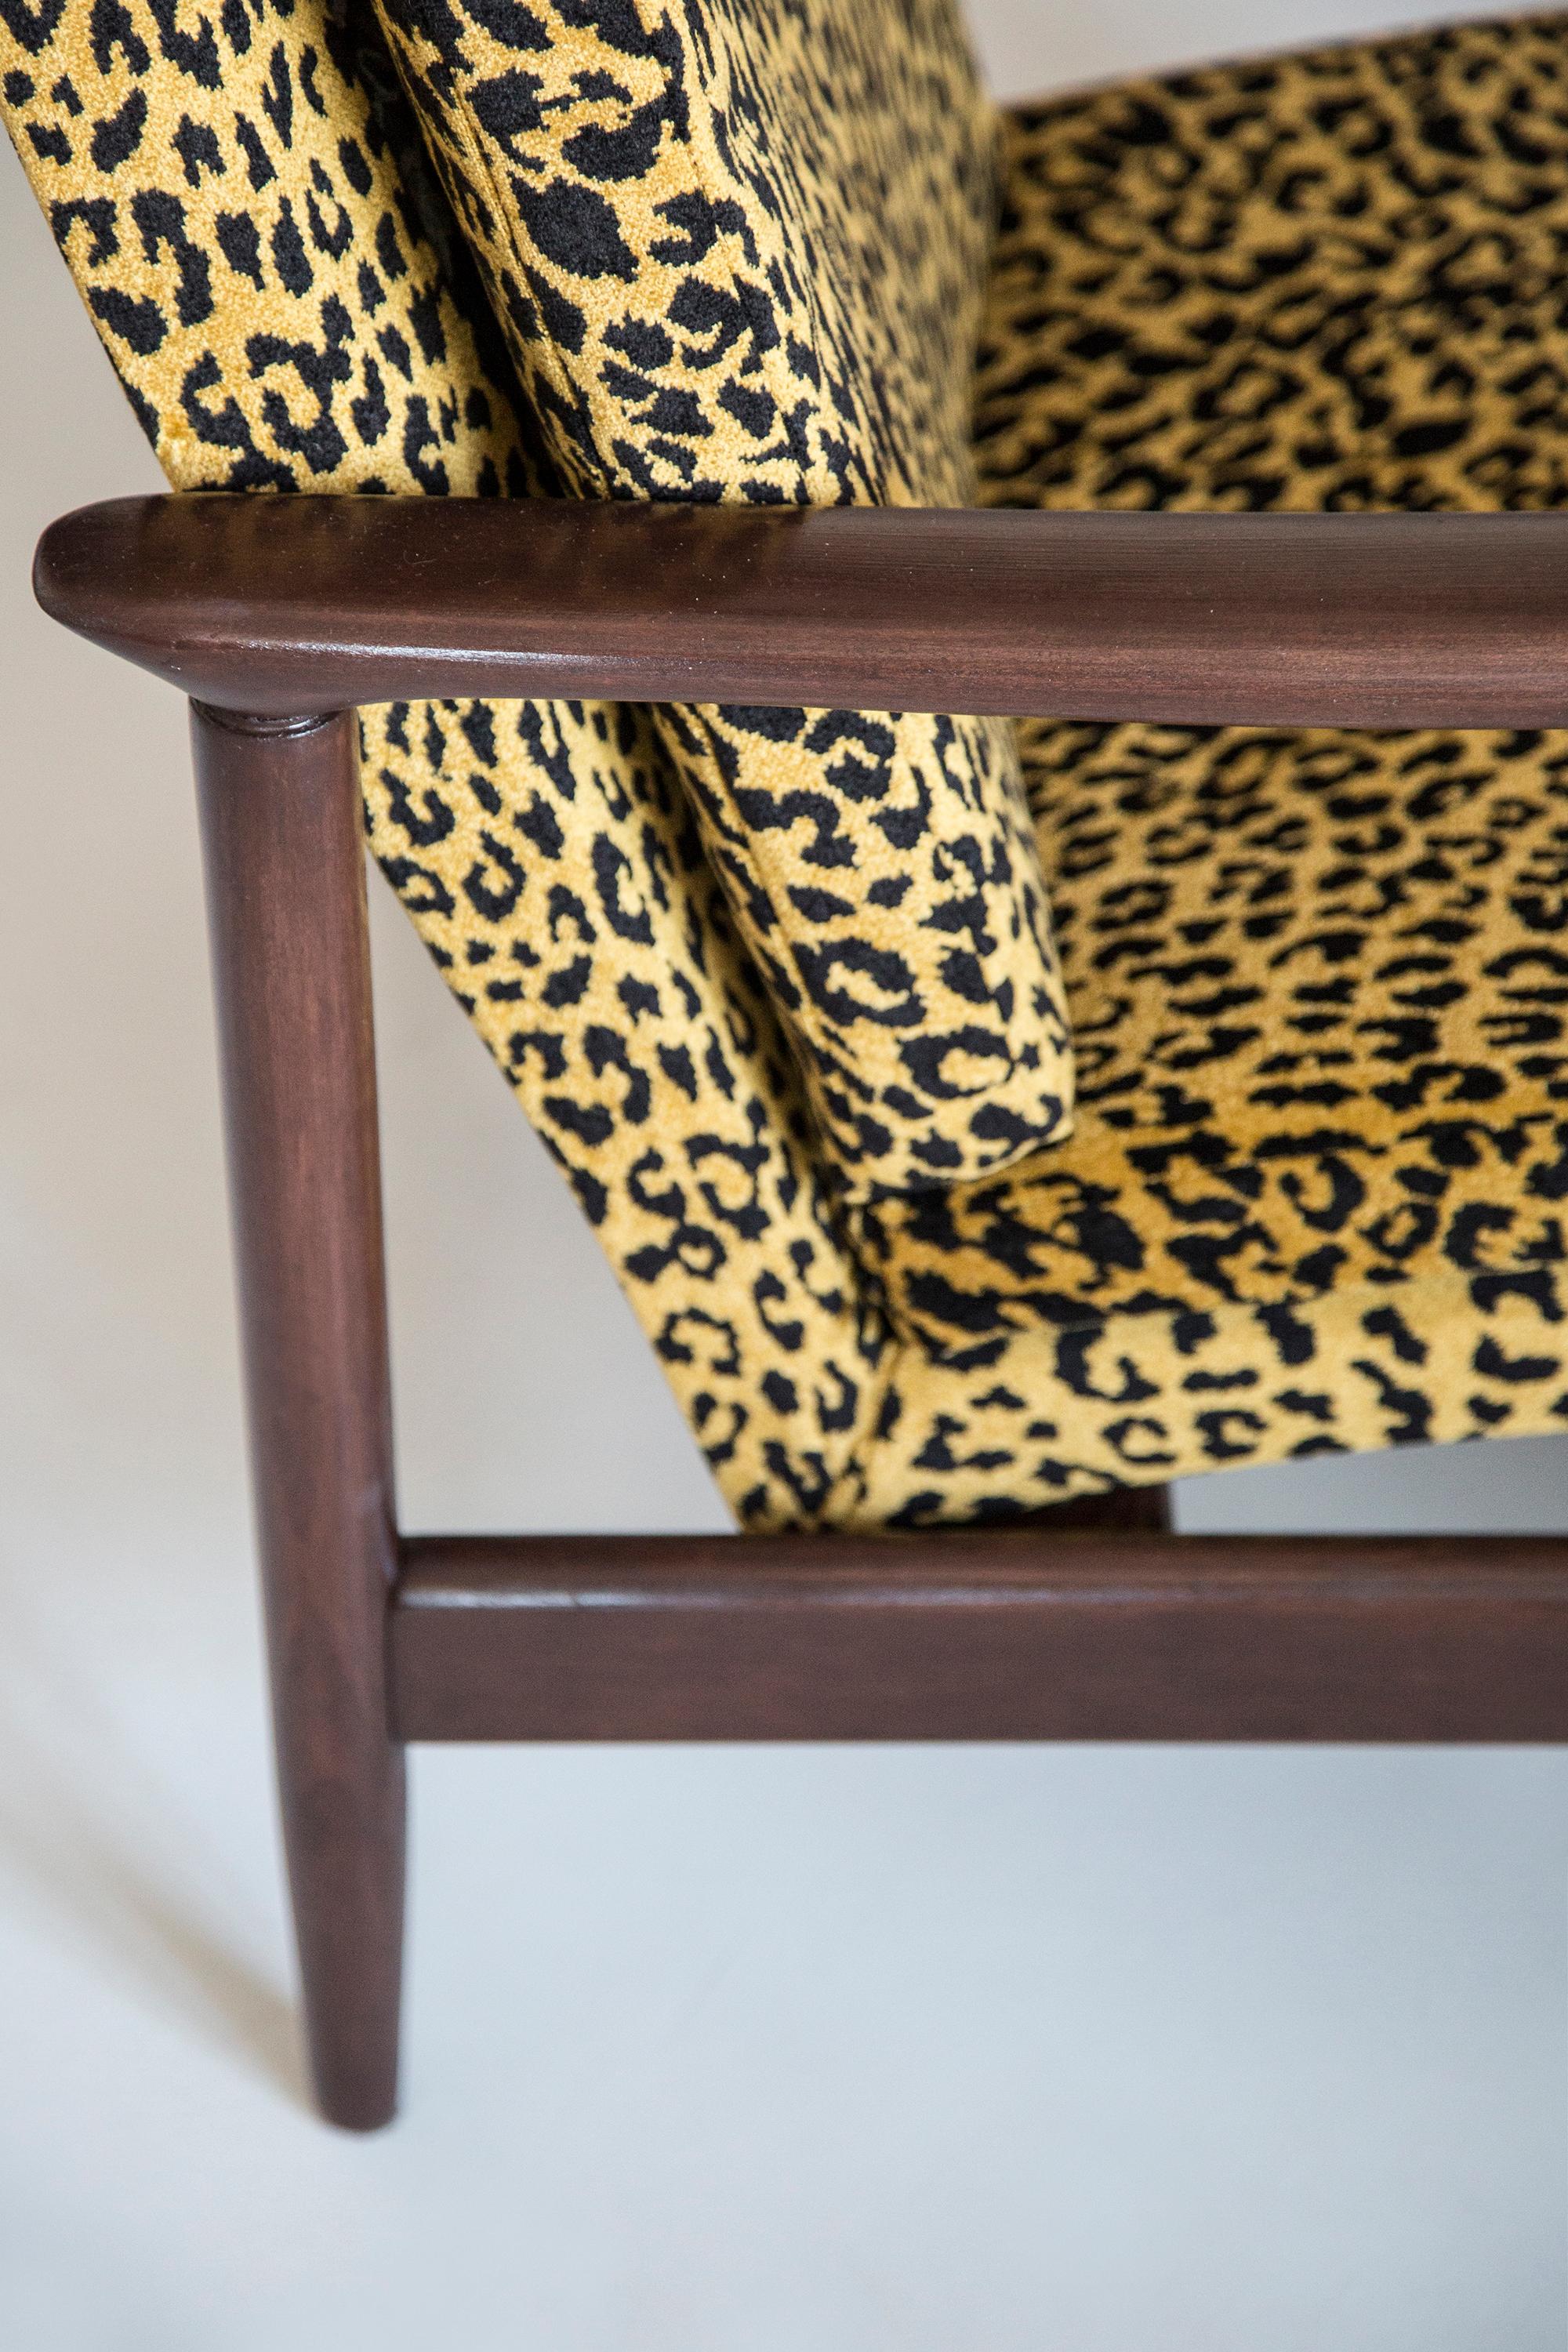 Polish Pair of Midcentury Leopard Armchairs, GFM 142, Edmund Homa, Europe, 1960s For Sale